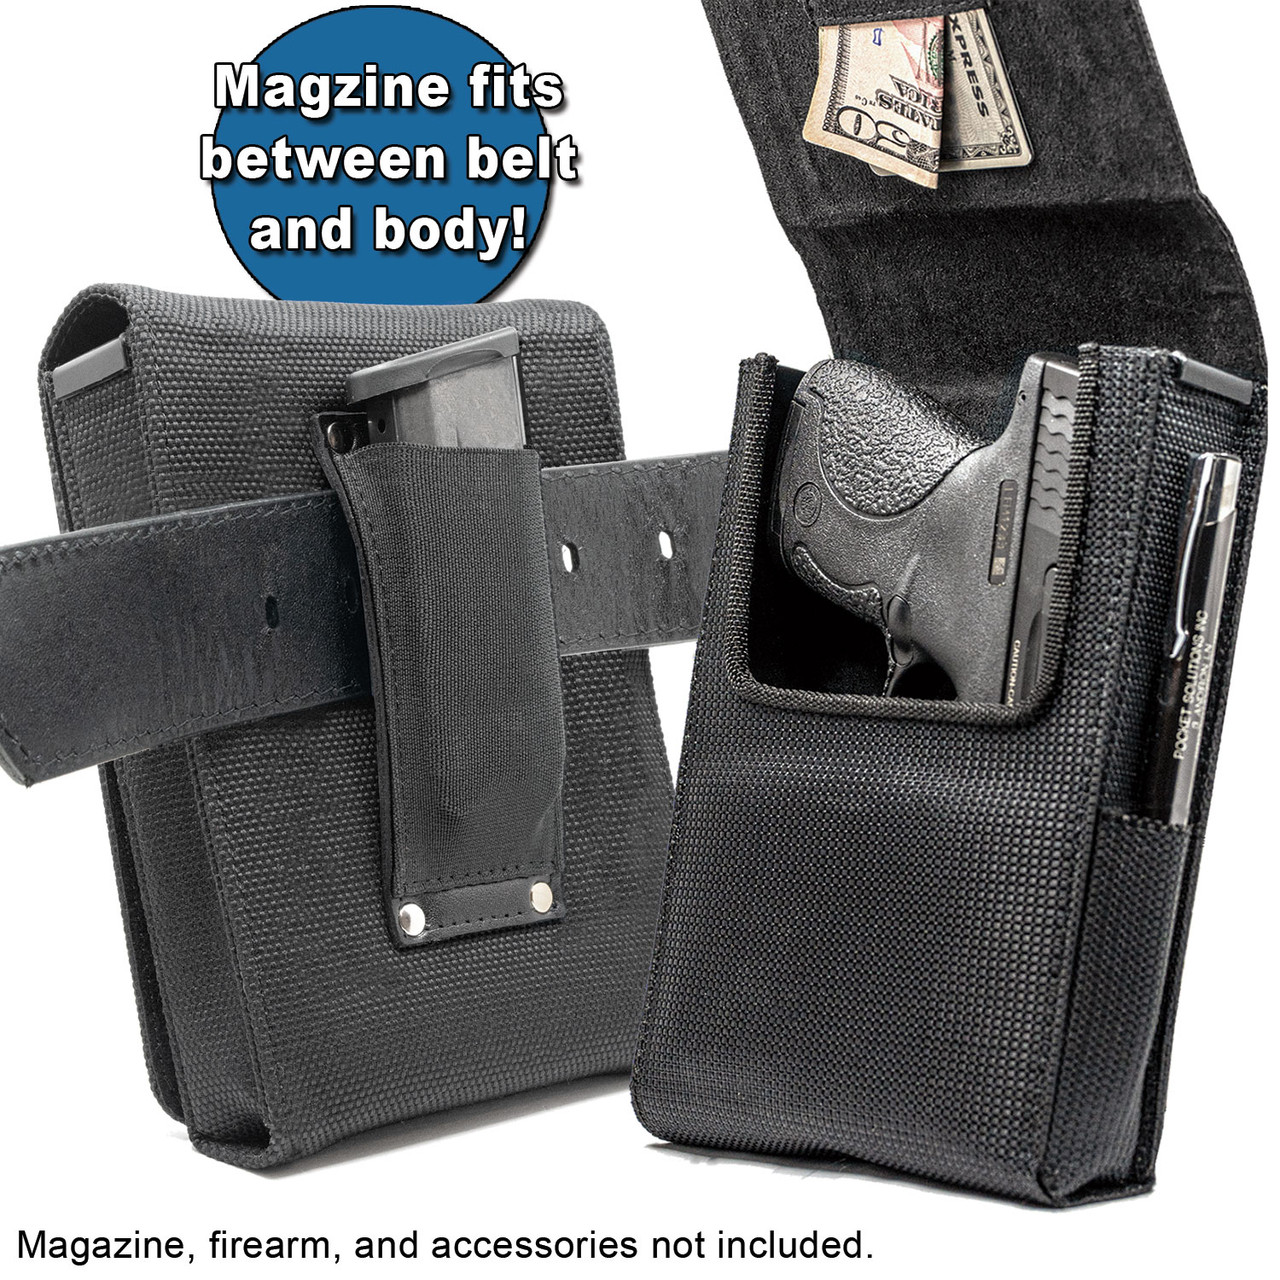 The Kahr P380 Max Defense Holster